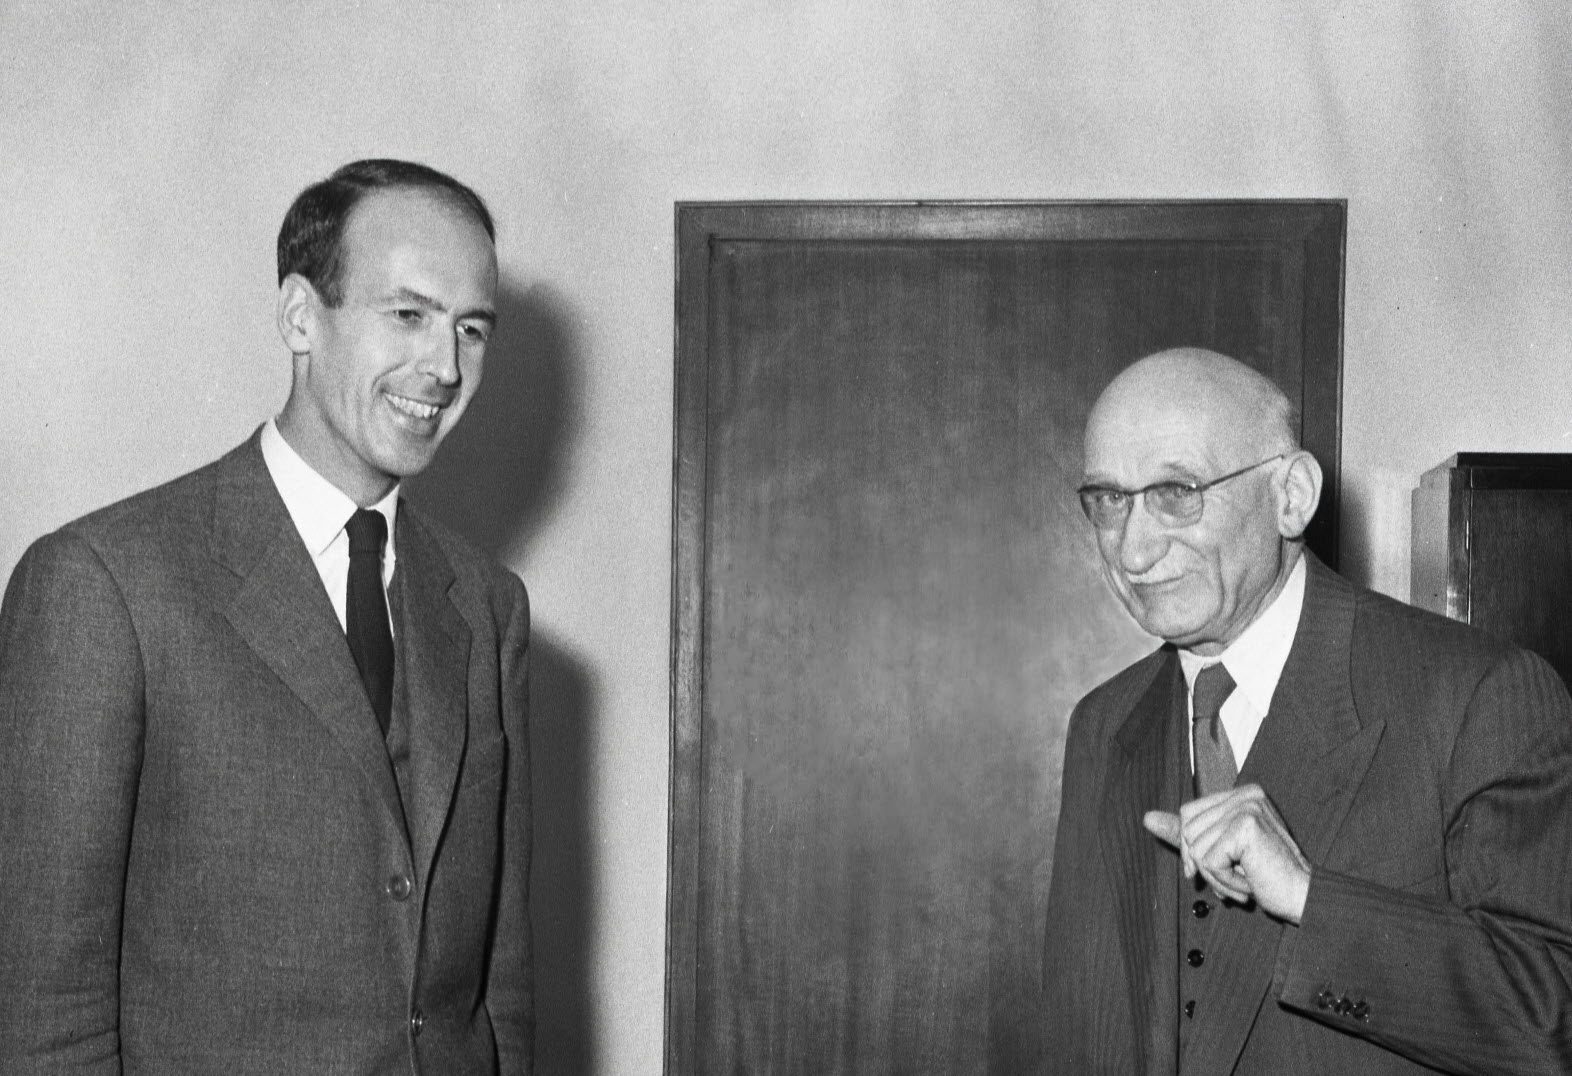 Photo of Valéry Giscard d’Estaing and Robert Schuman in Strasbourg